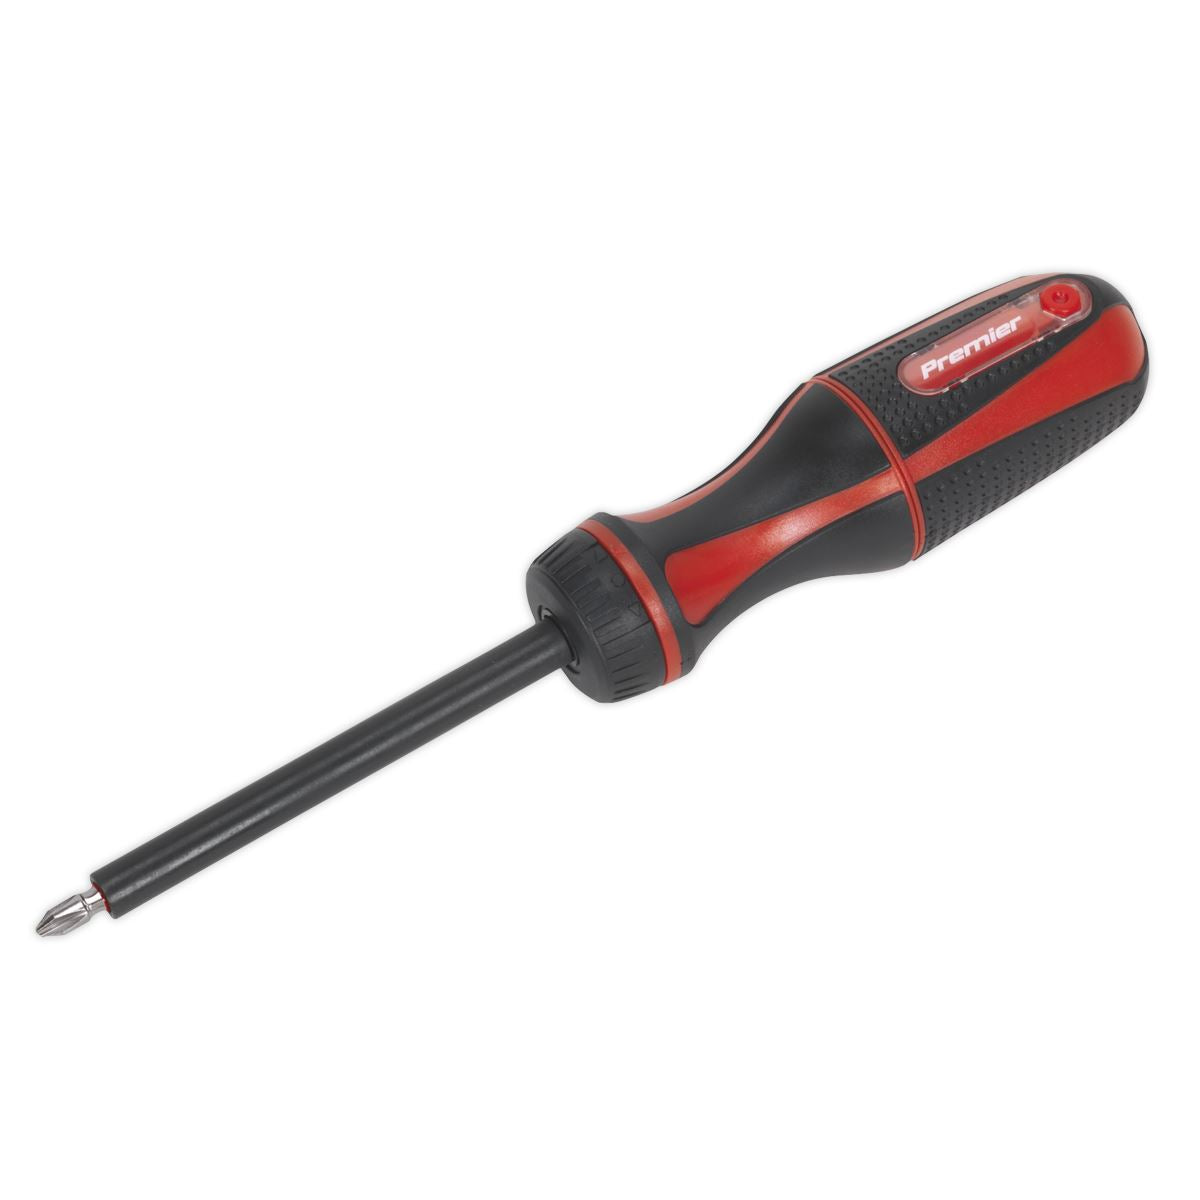 Sealey Premier 11 Piece Fine Tooth Ratchet Screwdriver with Bits